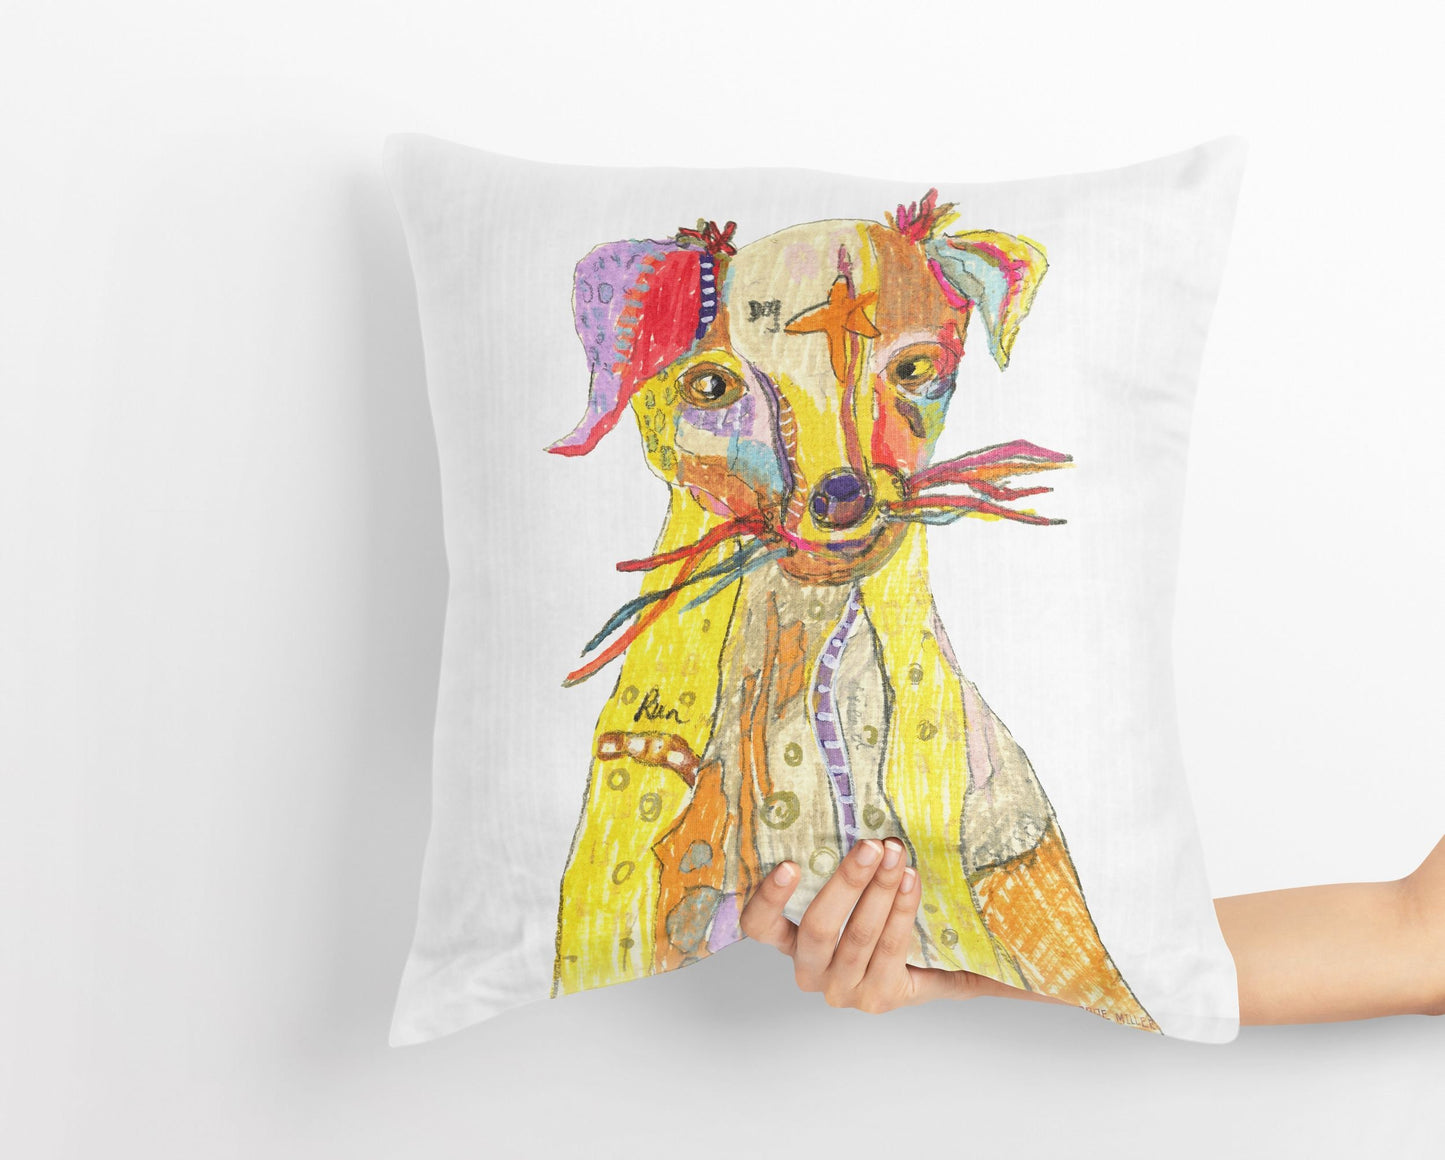 Dog Cute Pillow Cases, Pillow Cases For Kids, Toss Pillow, Animal Pillow, Art Pillow, Bright Yellow Pillow, Watercolor Pillow Cases